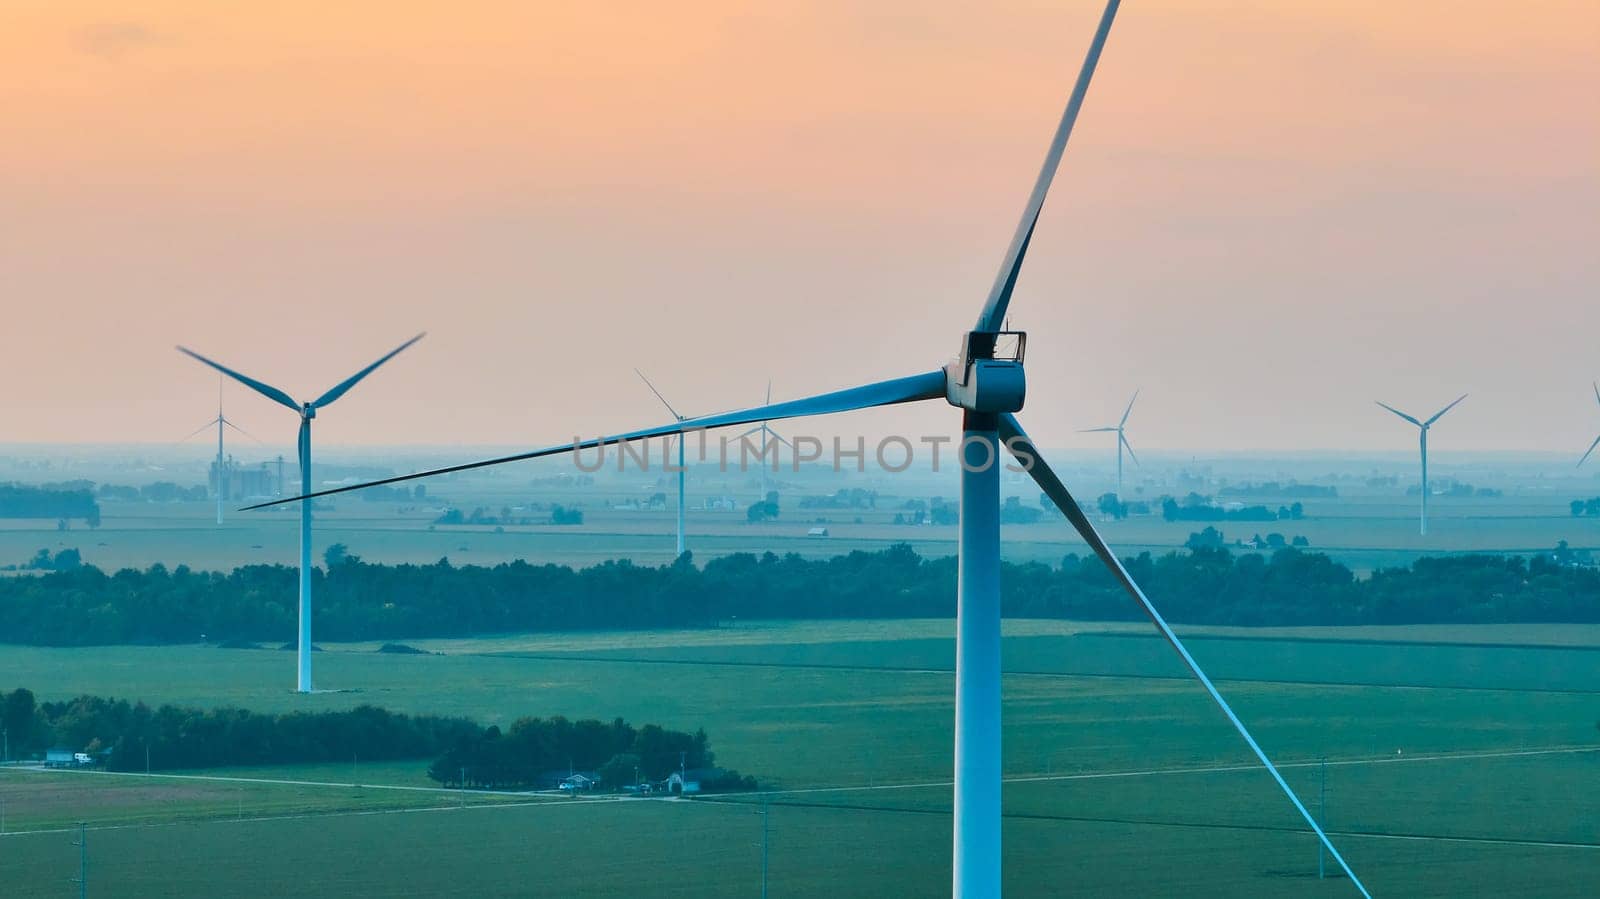 Image of Aerial crisp wind turbine at sunset with orange sky with wind farm behind it and green fields below